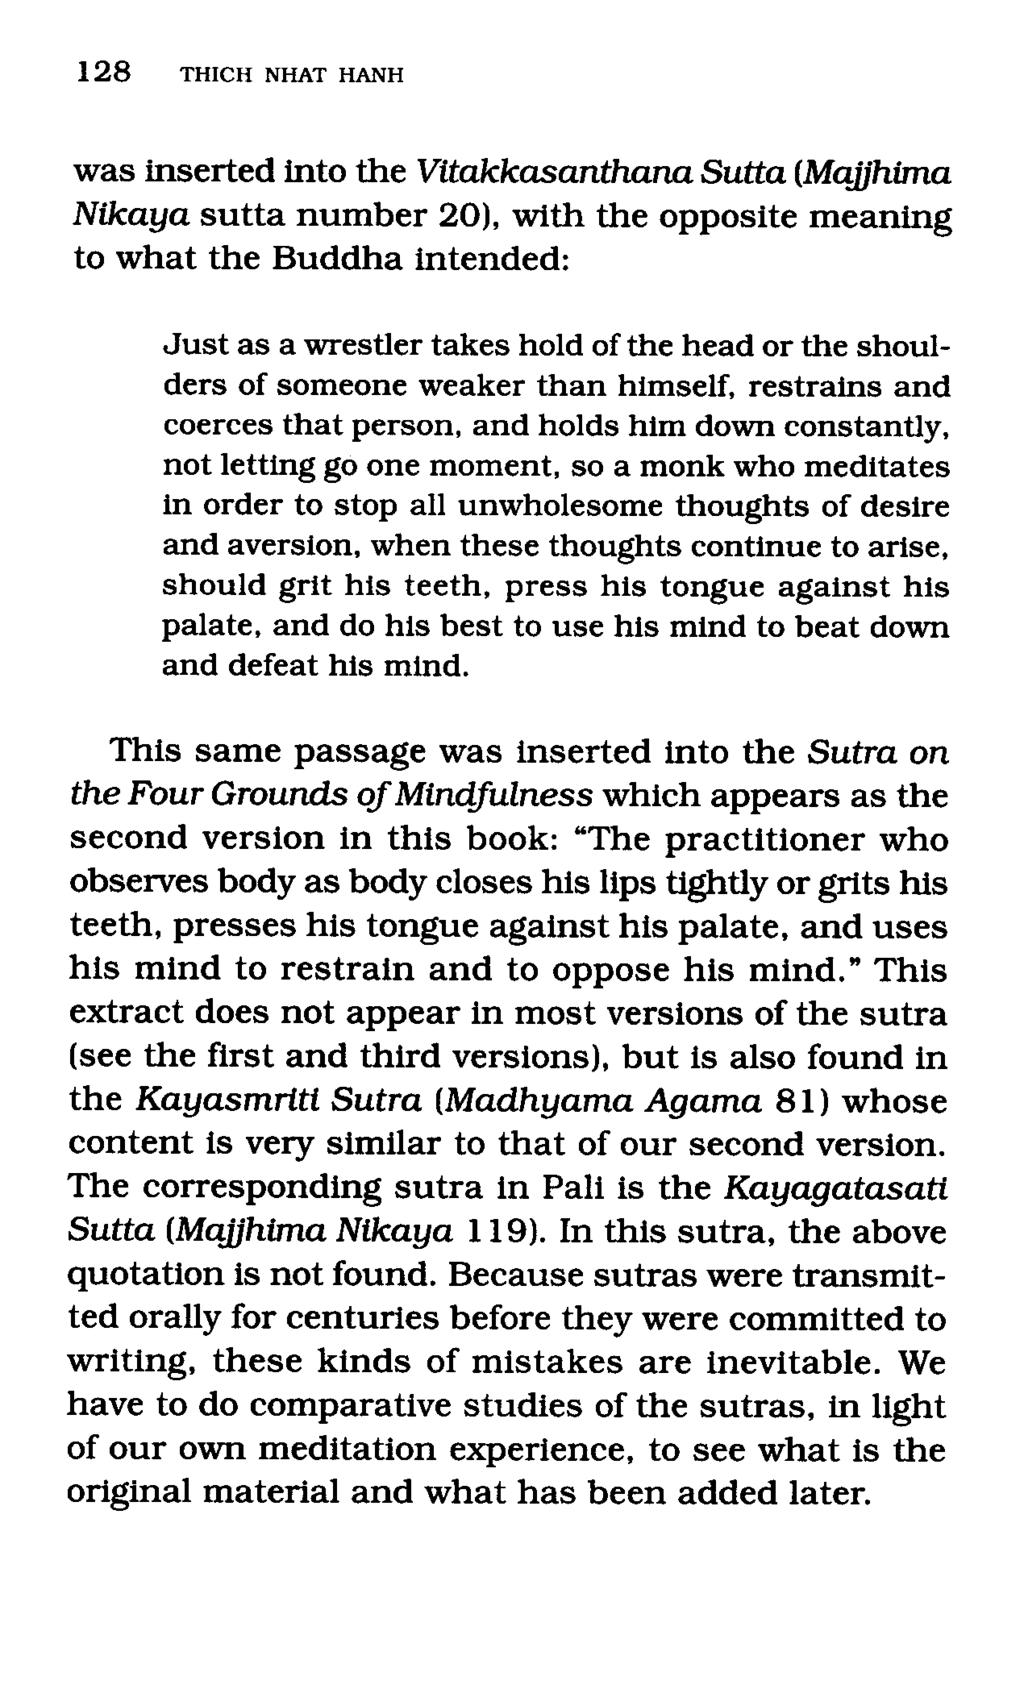 was inserted into the Vitakkasanthana Sutta (MaJhima Nikaya sutta number 20), with the opposite meaning to what the Buddha intended: Just as a wrestler takes hold of the head or the shoulders of